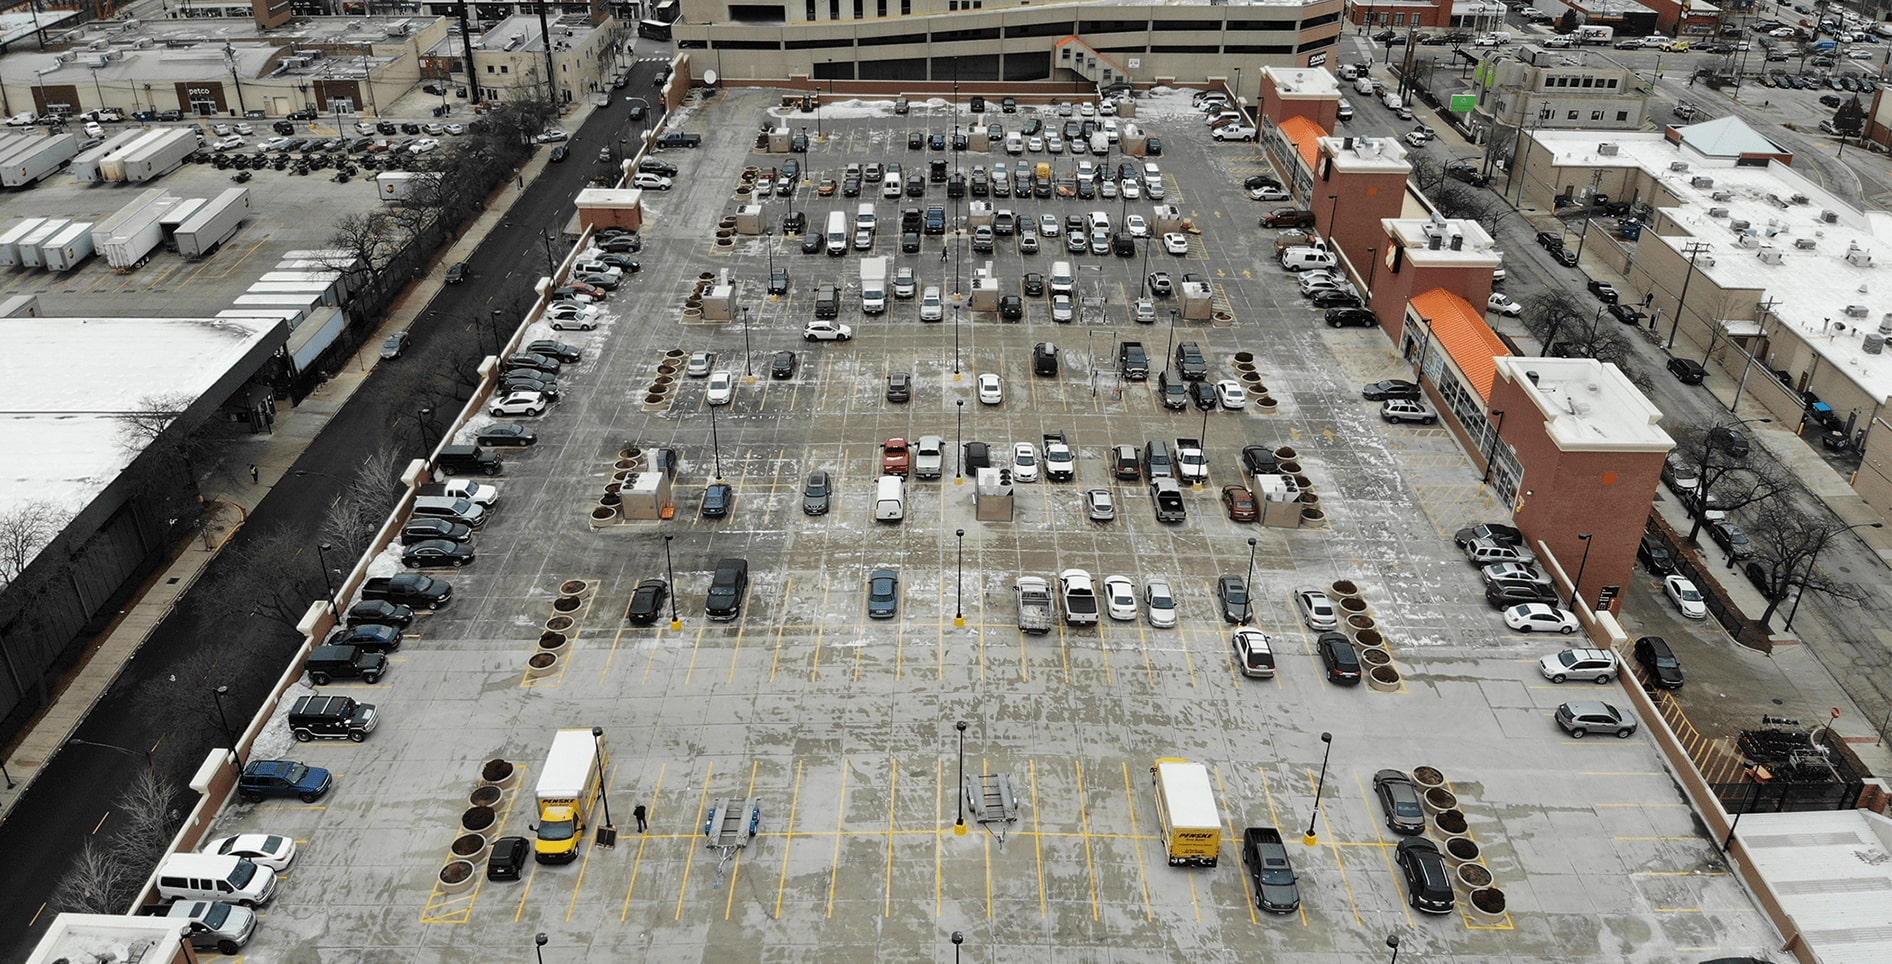 let's pave project in chicago redoing parking deck